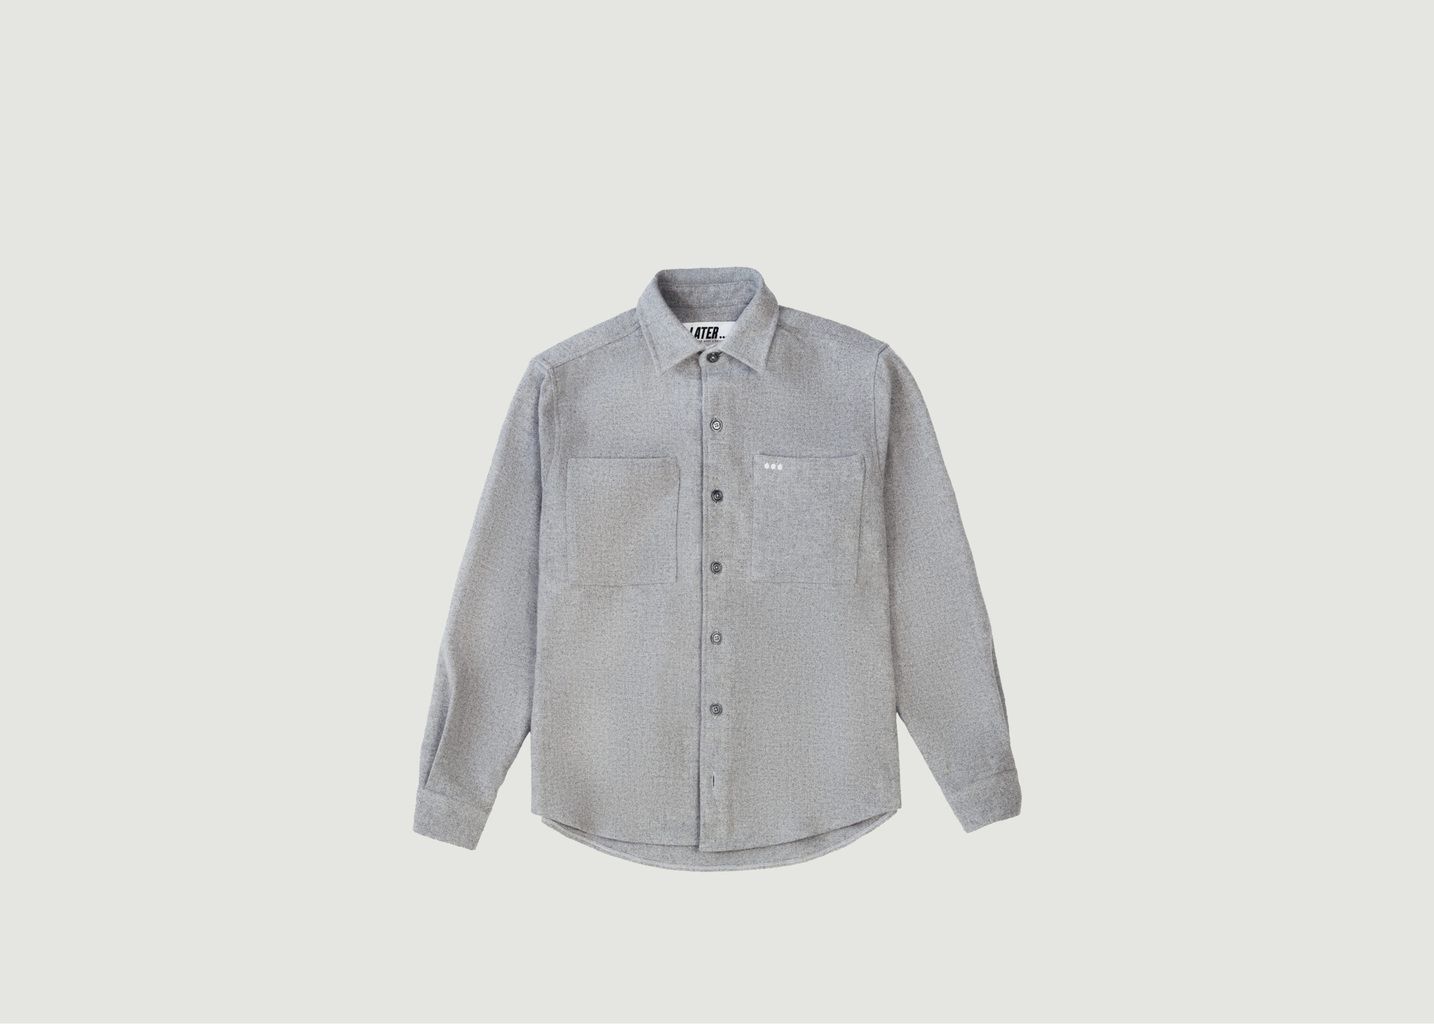 19. Casual wool overshirt - Later